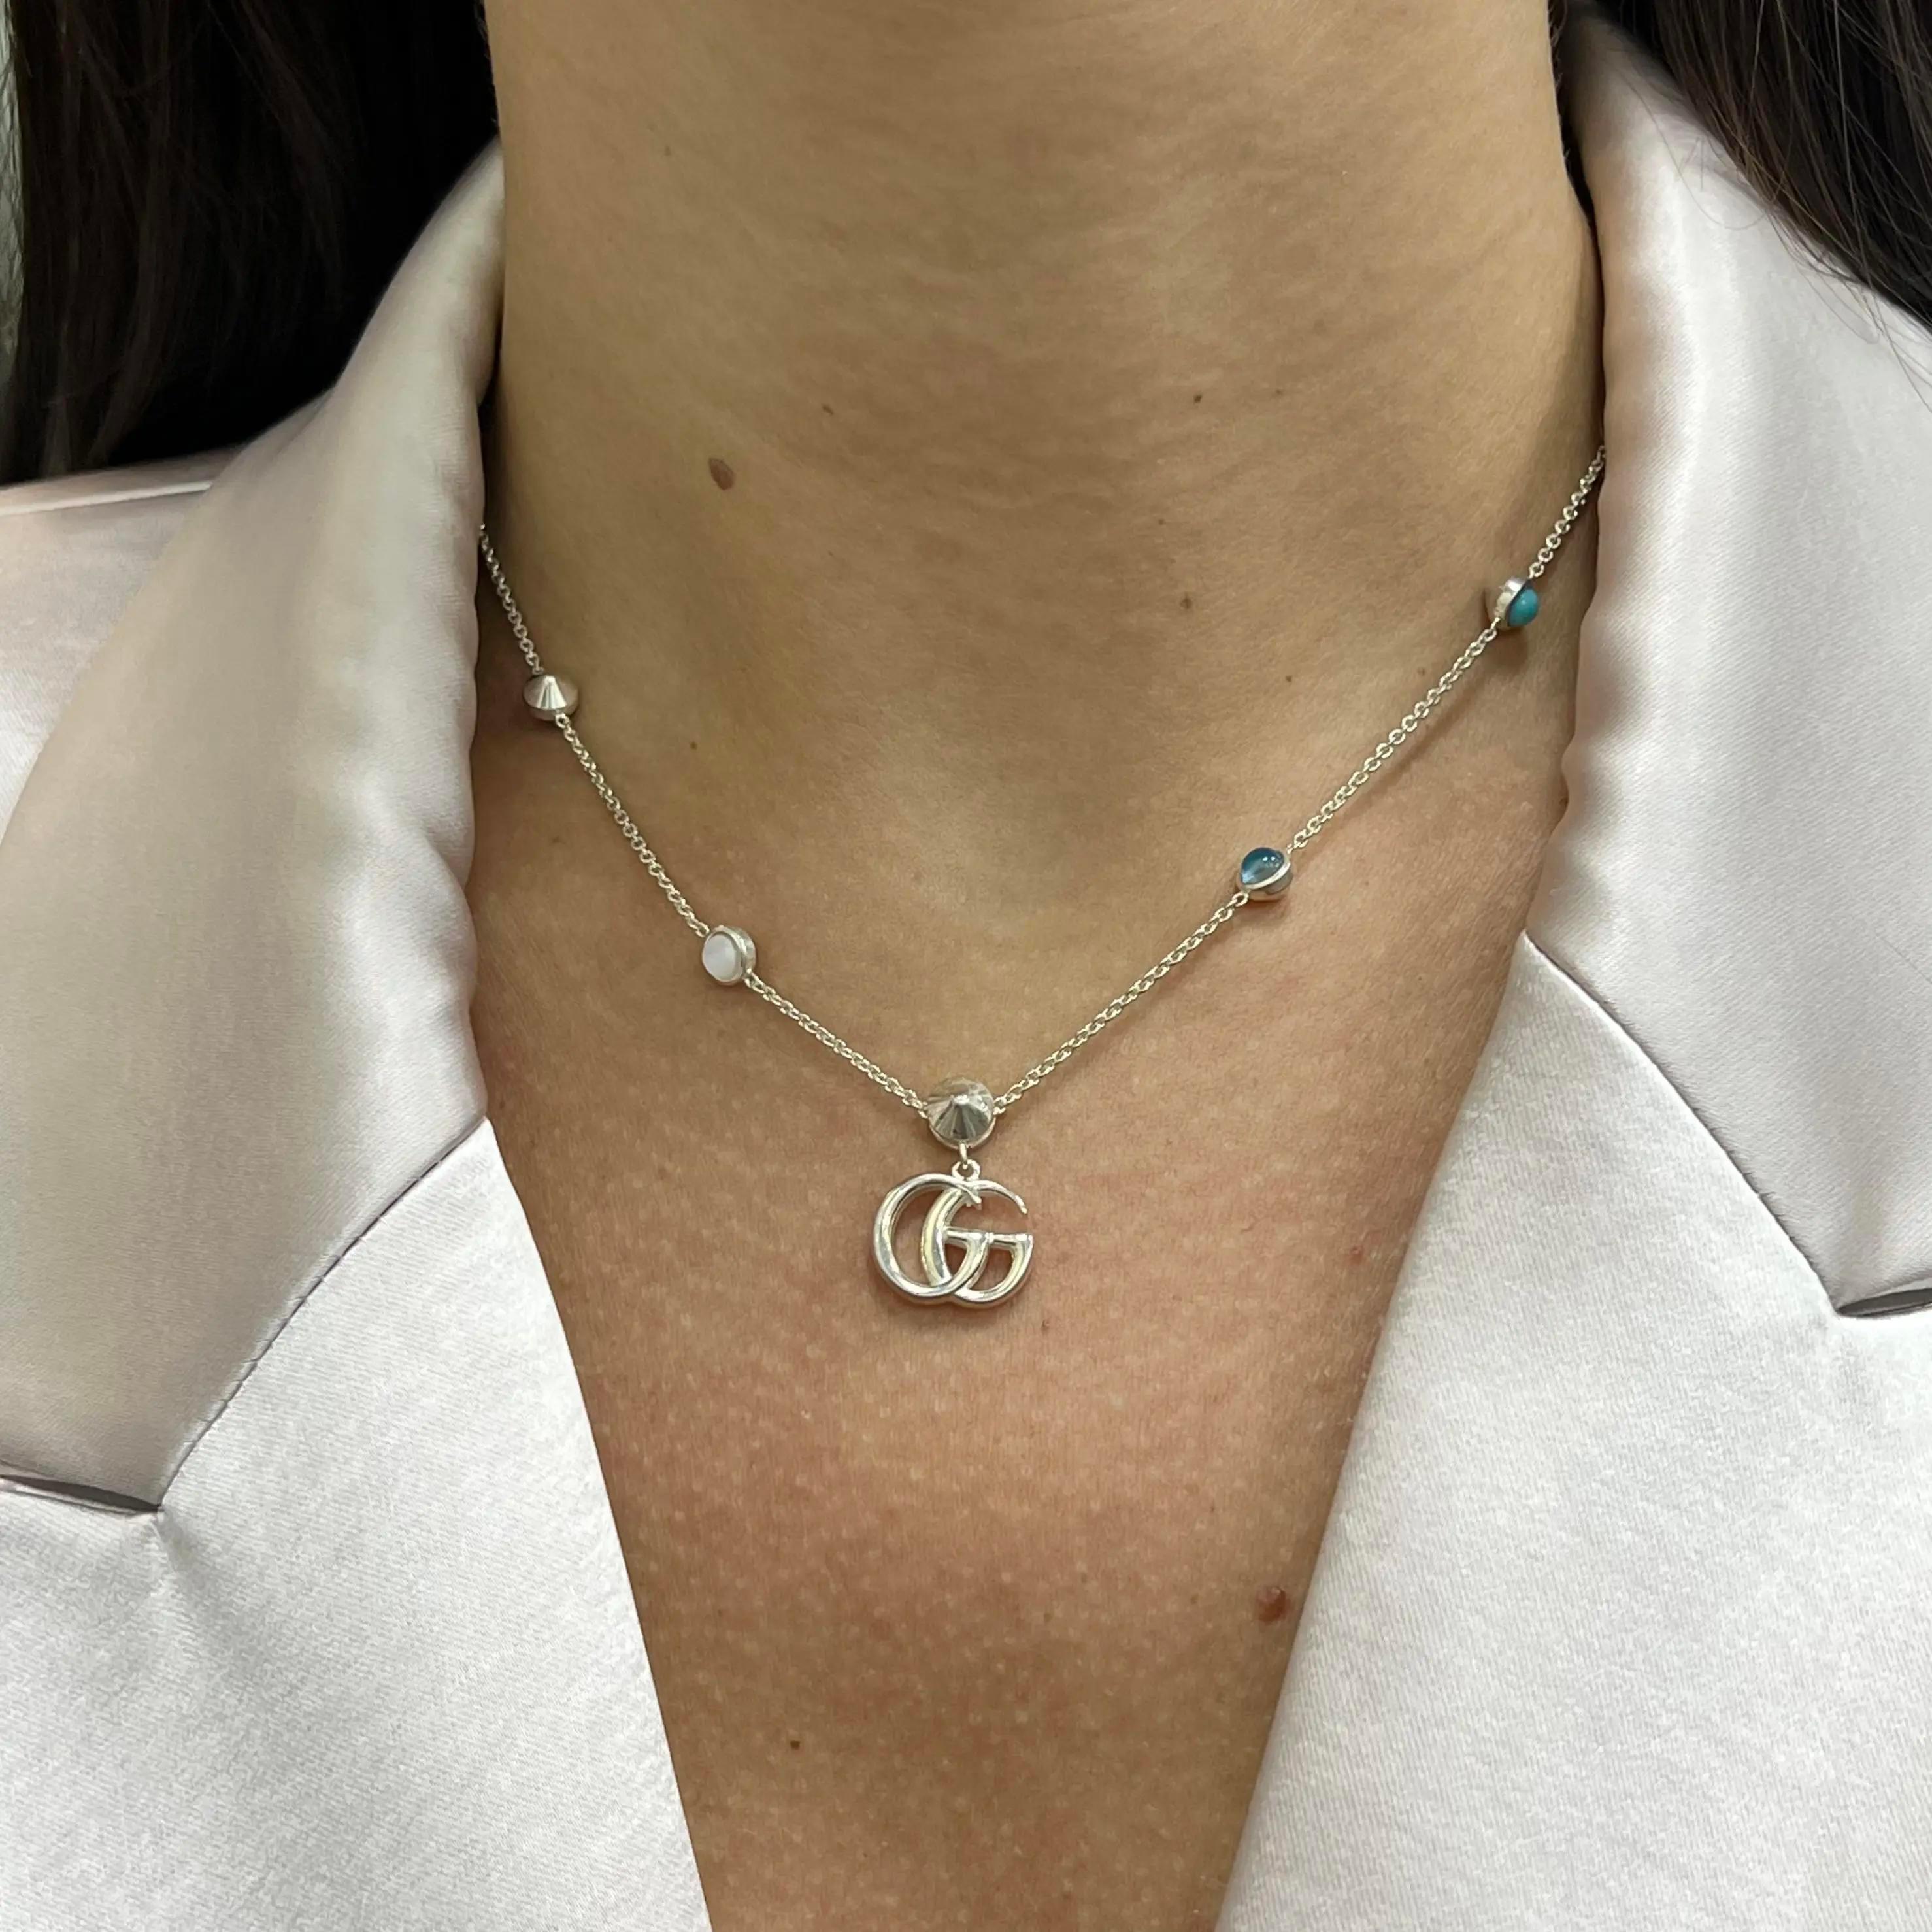 Gucci Double G Mother of Pearl Necklace 925 Sterling Silver In Excellent Condition For Sale In New York, NY